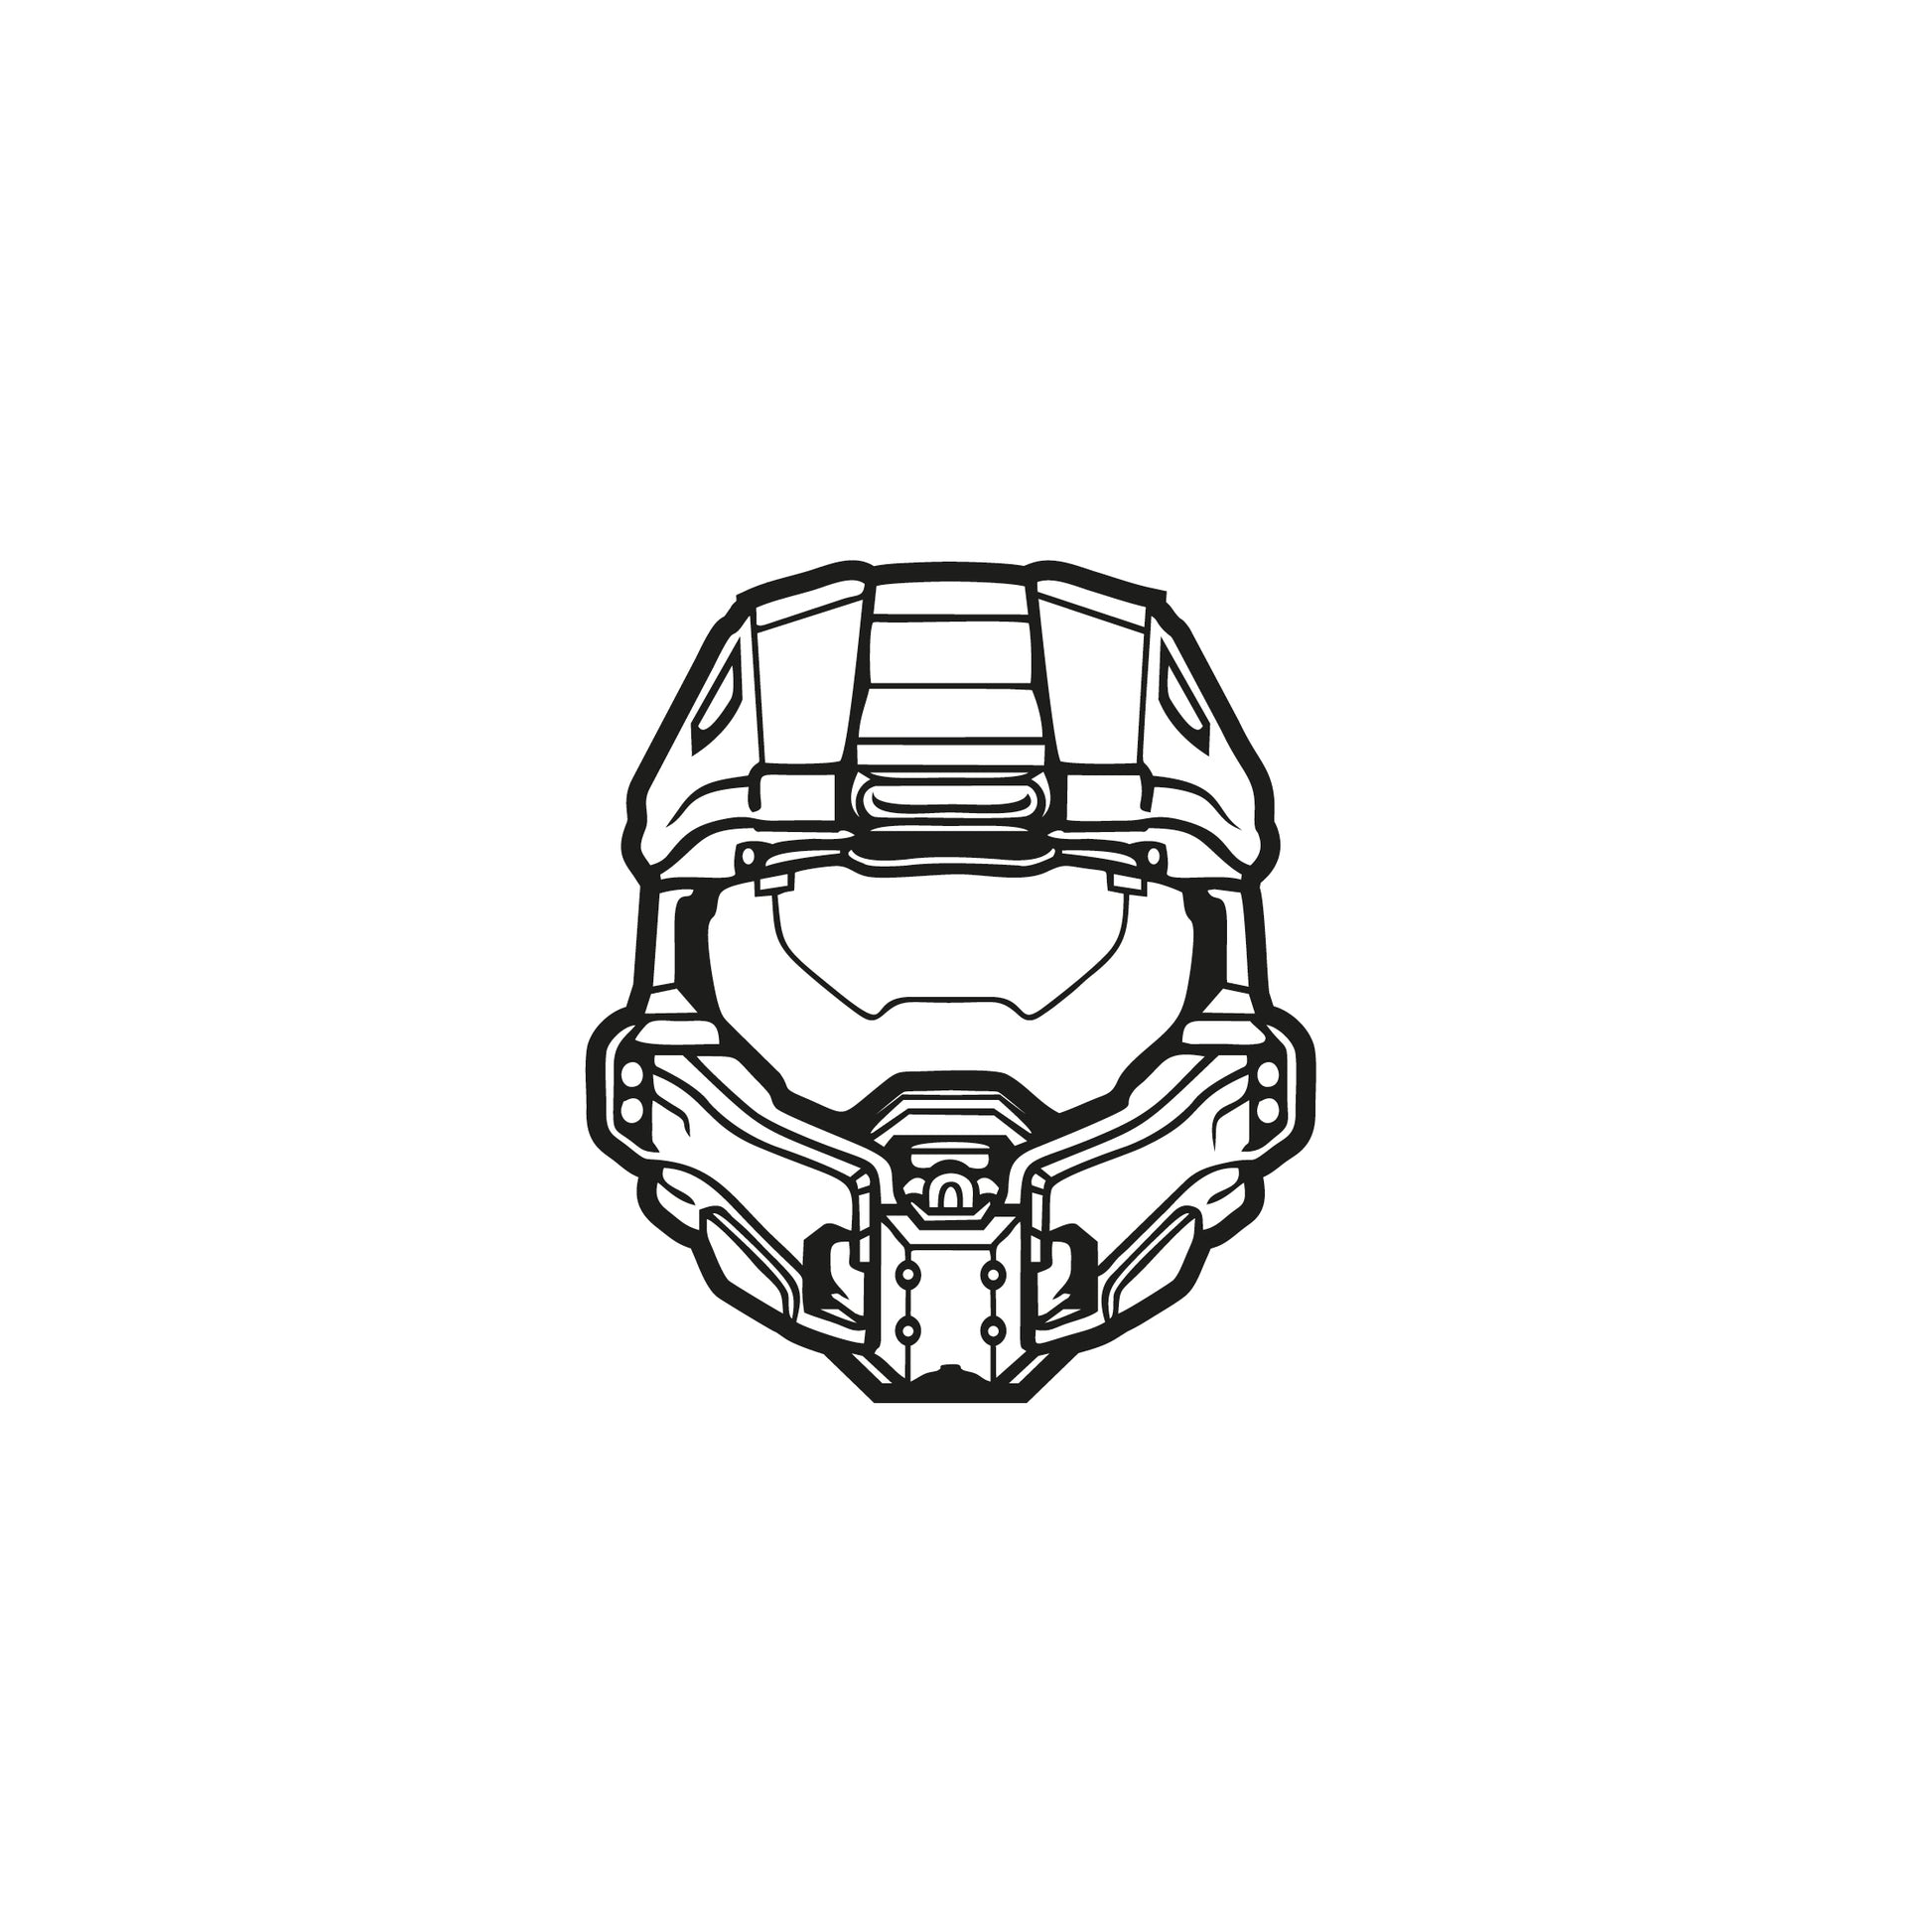 Halo Master Chief - Wall decal sticker